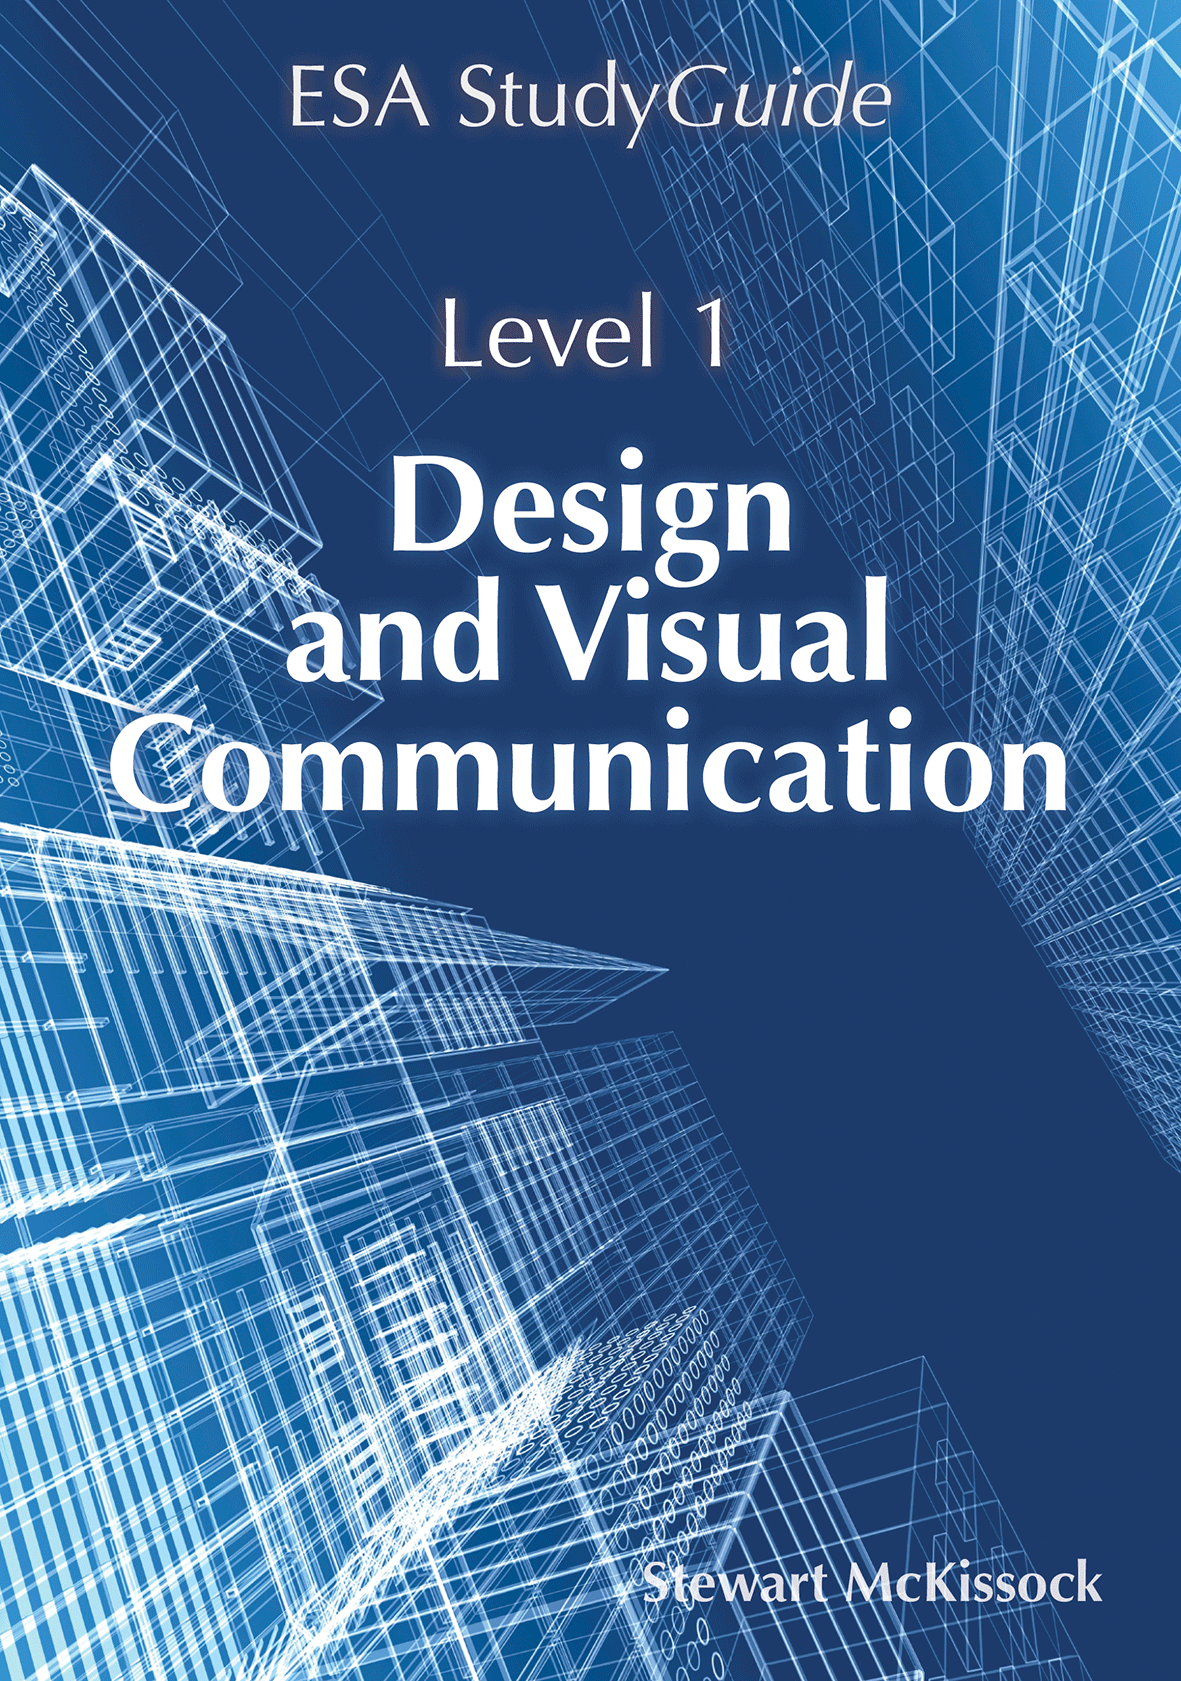 LearnWell　and　Design　Communication　ESA　Study　Guide　Level　Visual